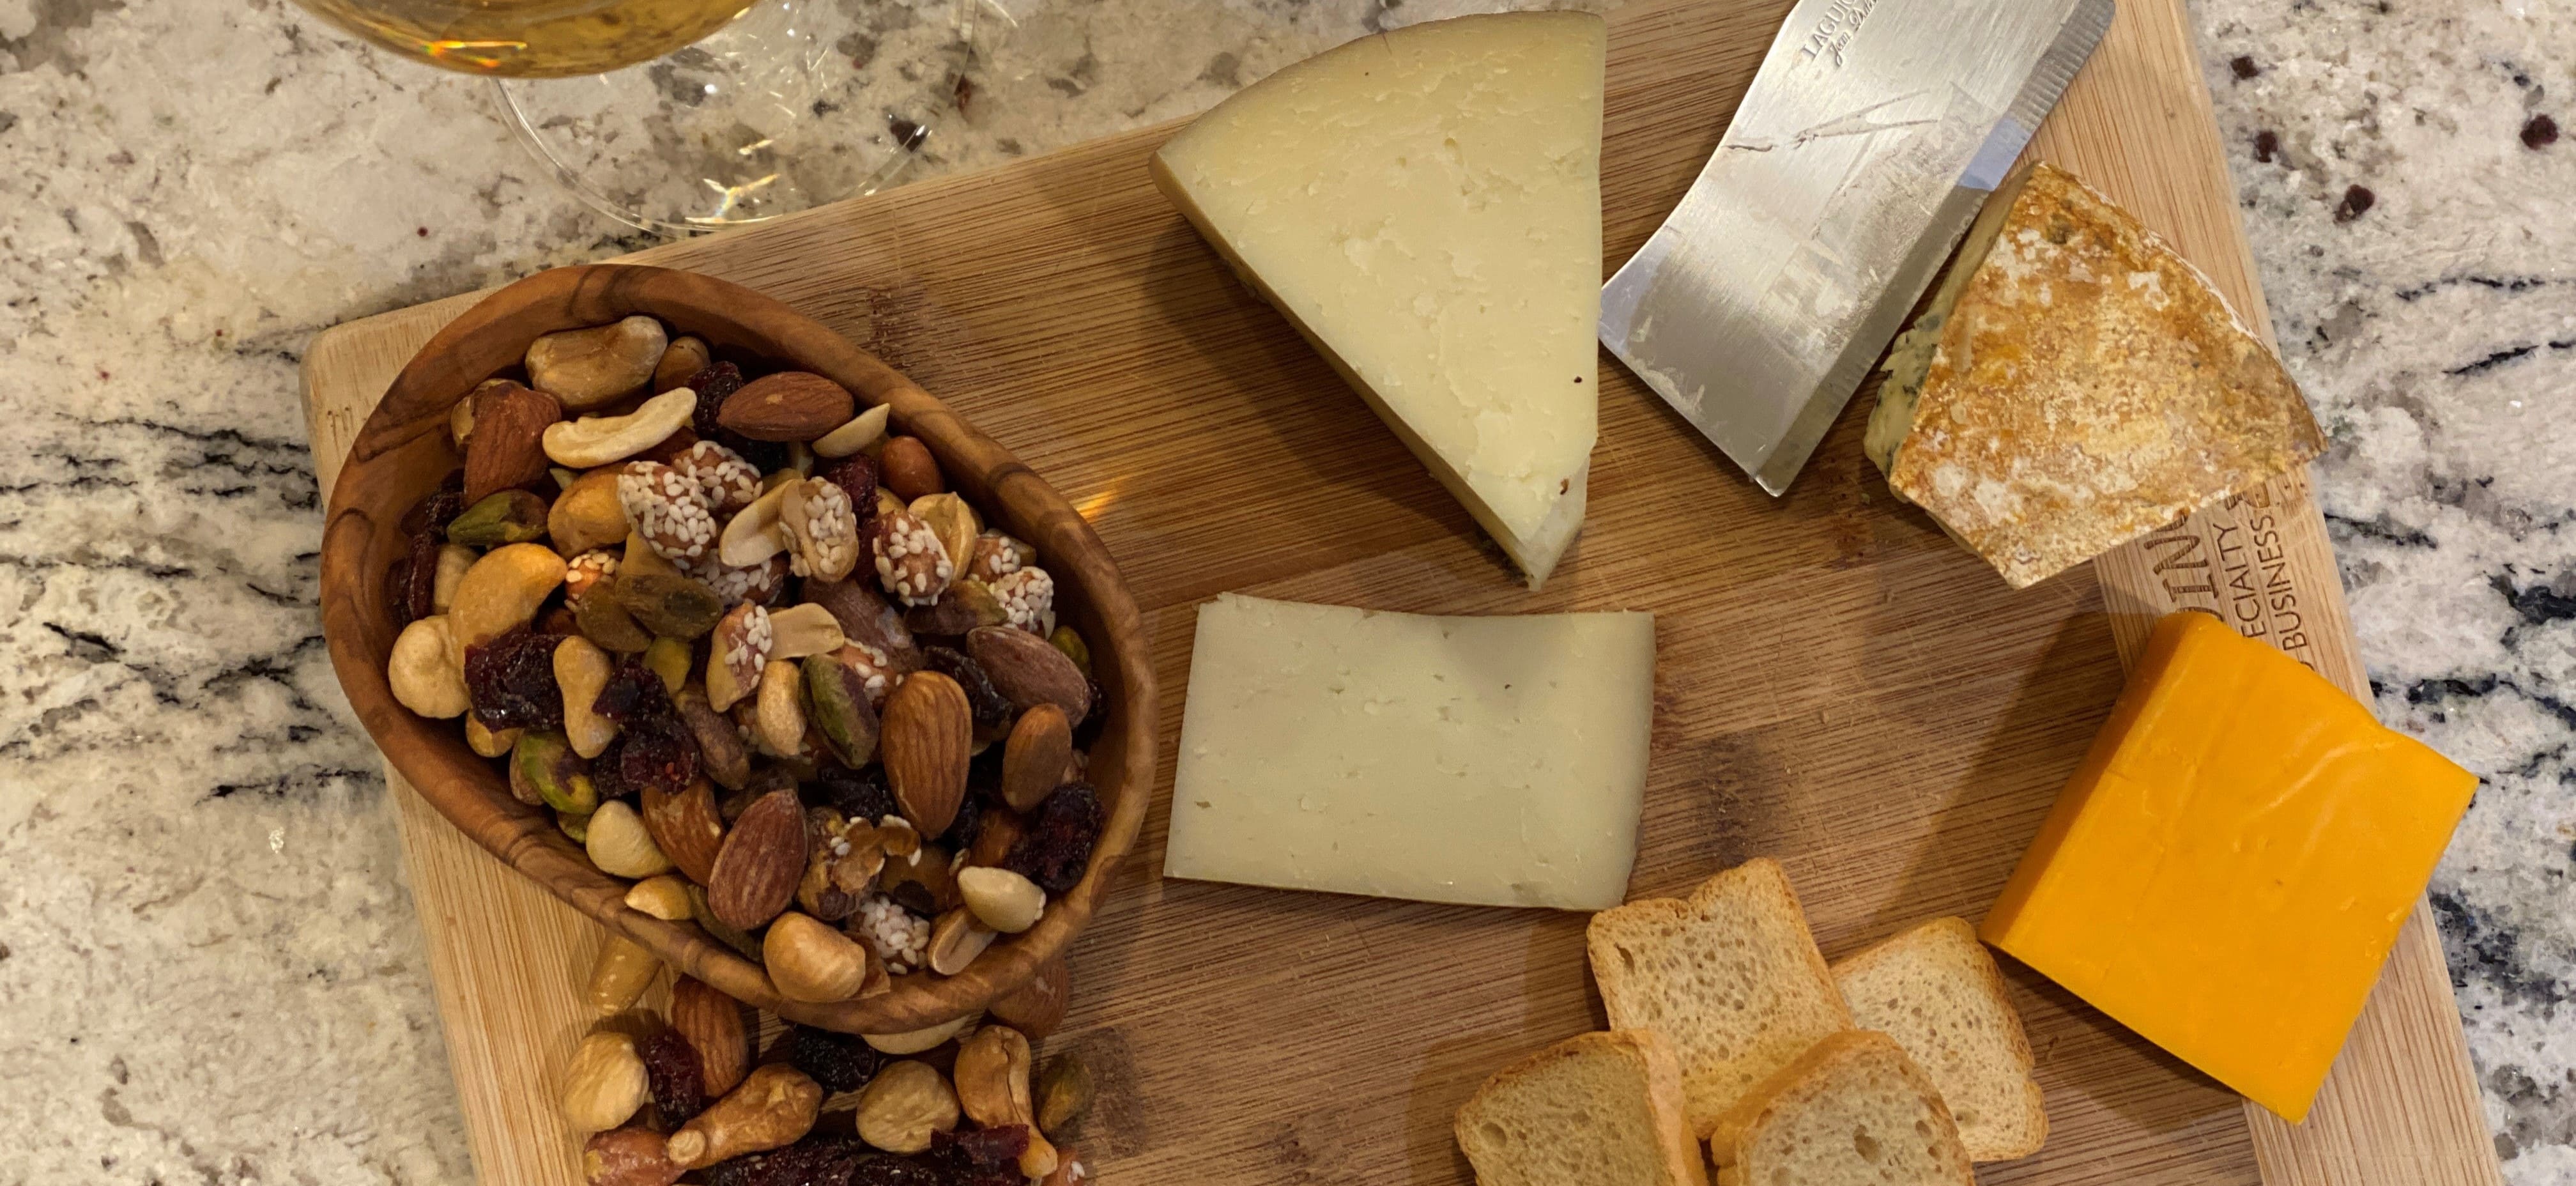 Nuts and cheese on a cutting board